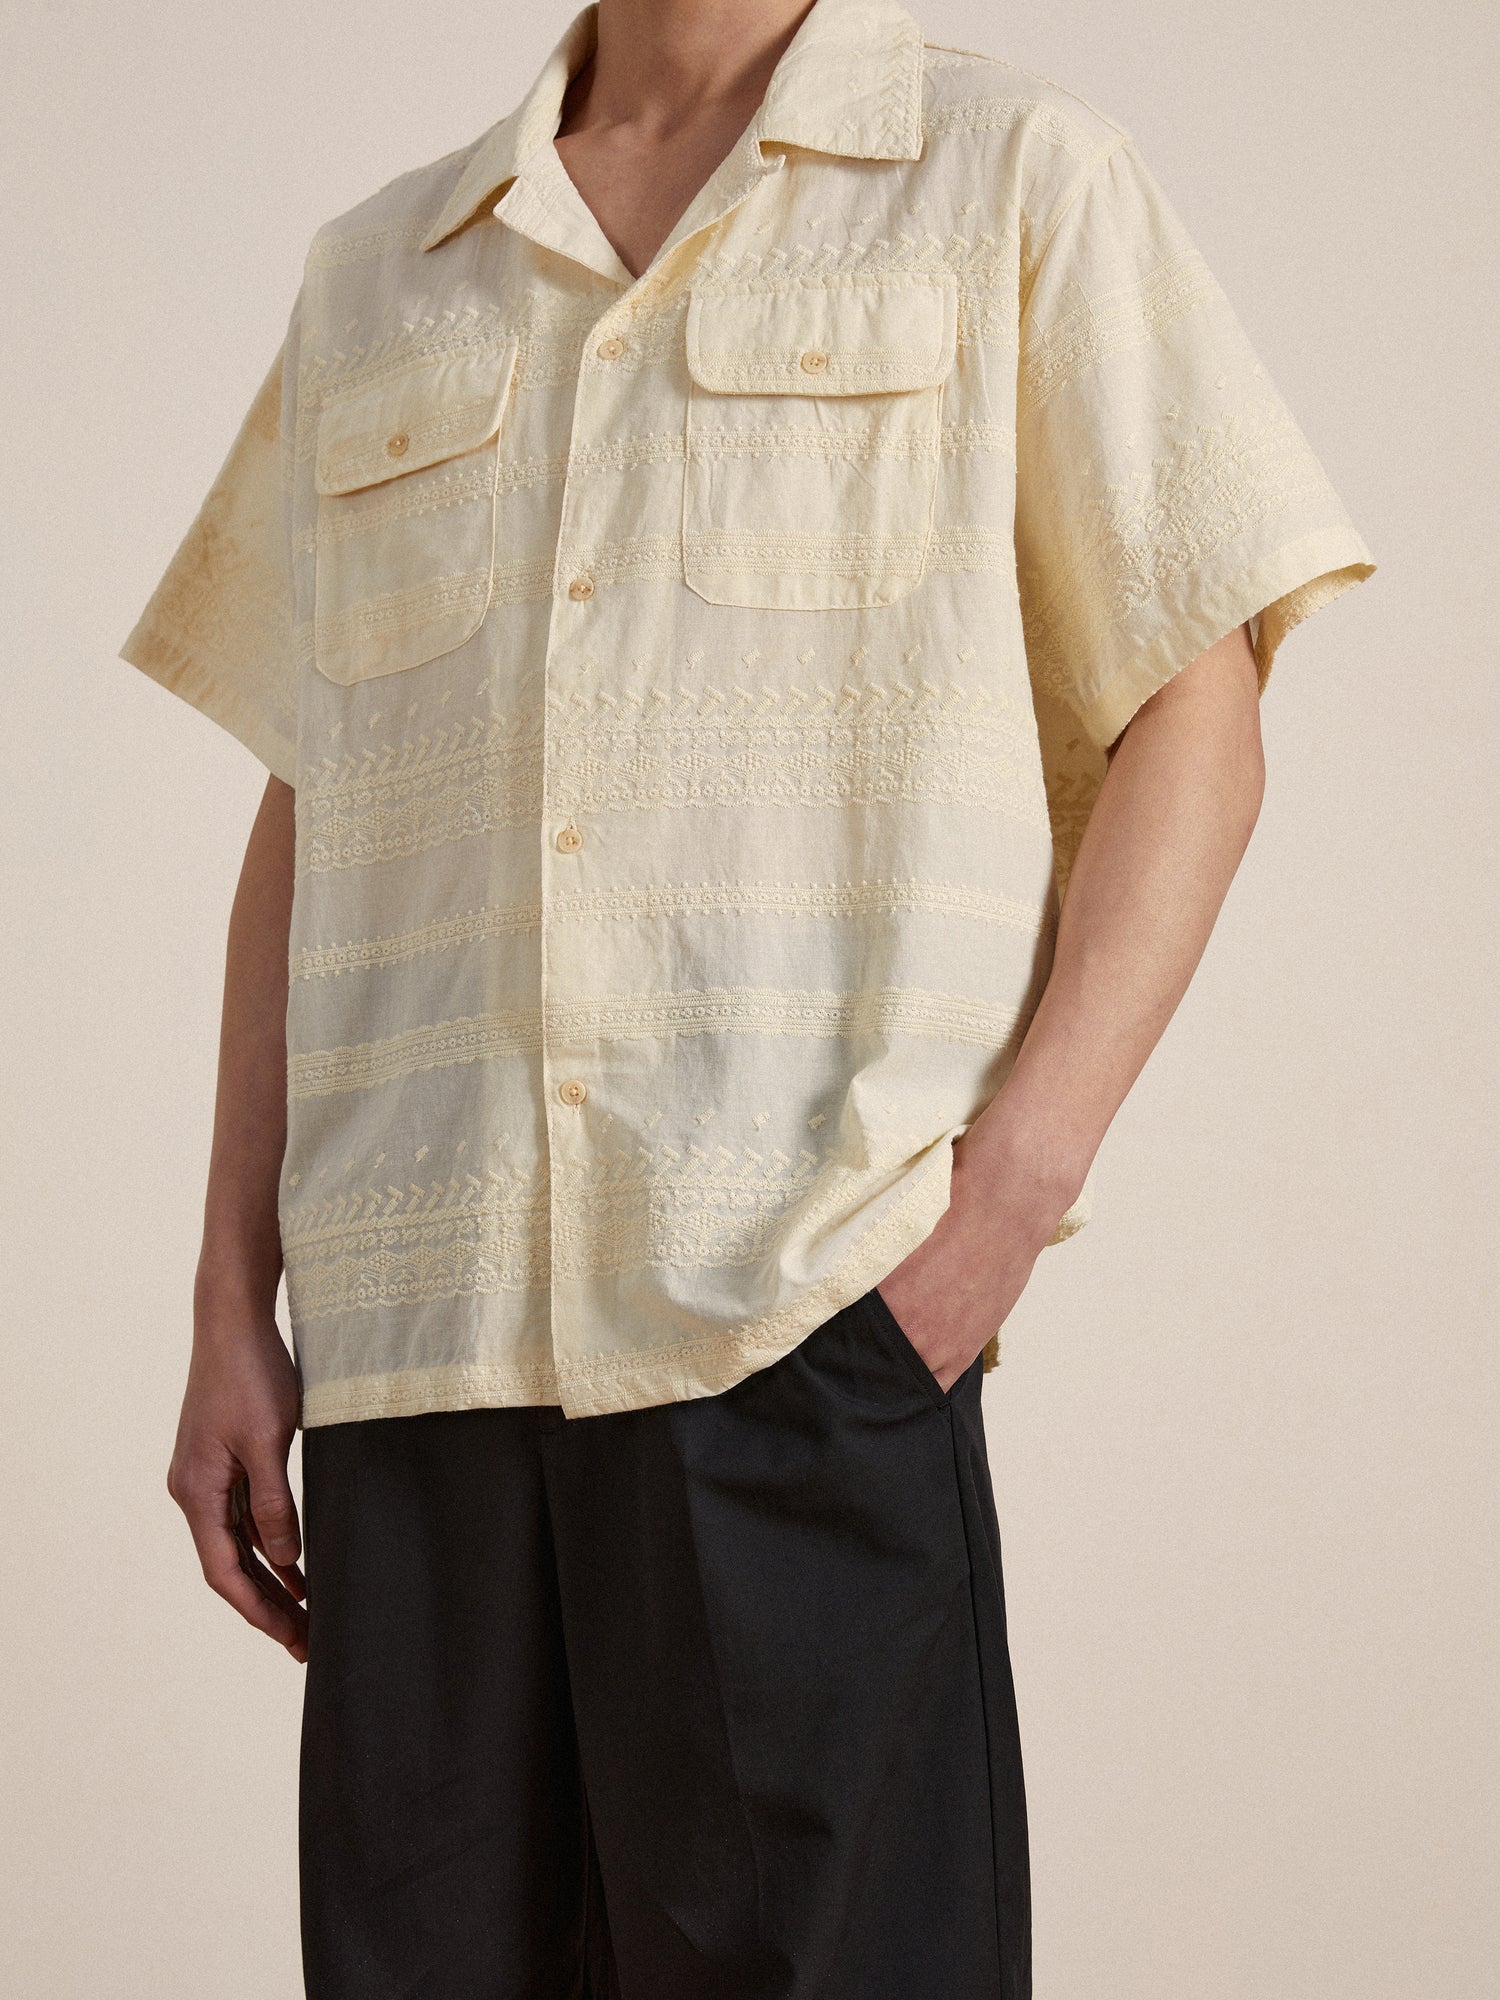 A man wearing a delicate lace detailing yellow Found Lace SS Camp Shirt and black pants.